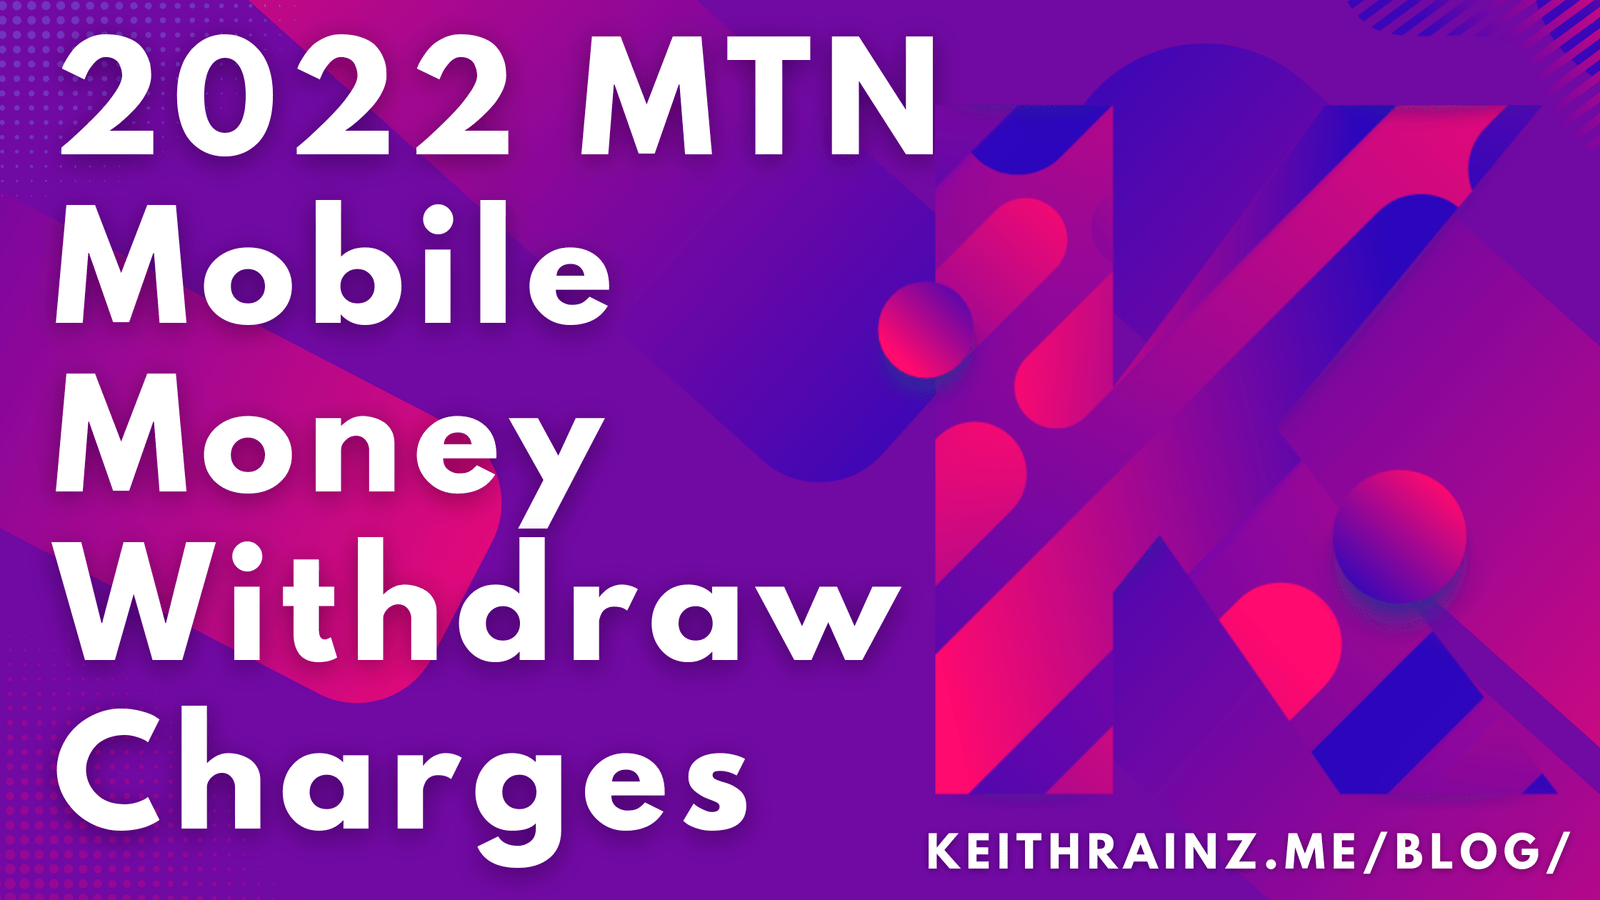 (UPADTED) 2022 MTN Mobile Money Withdraw Charges